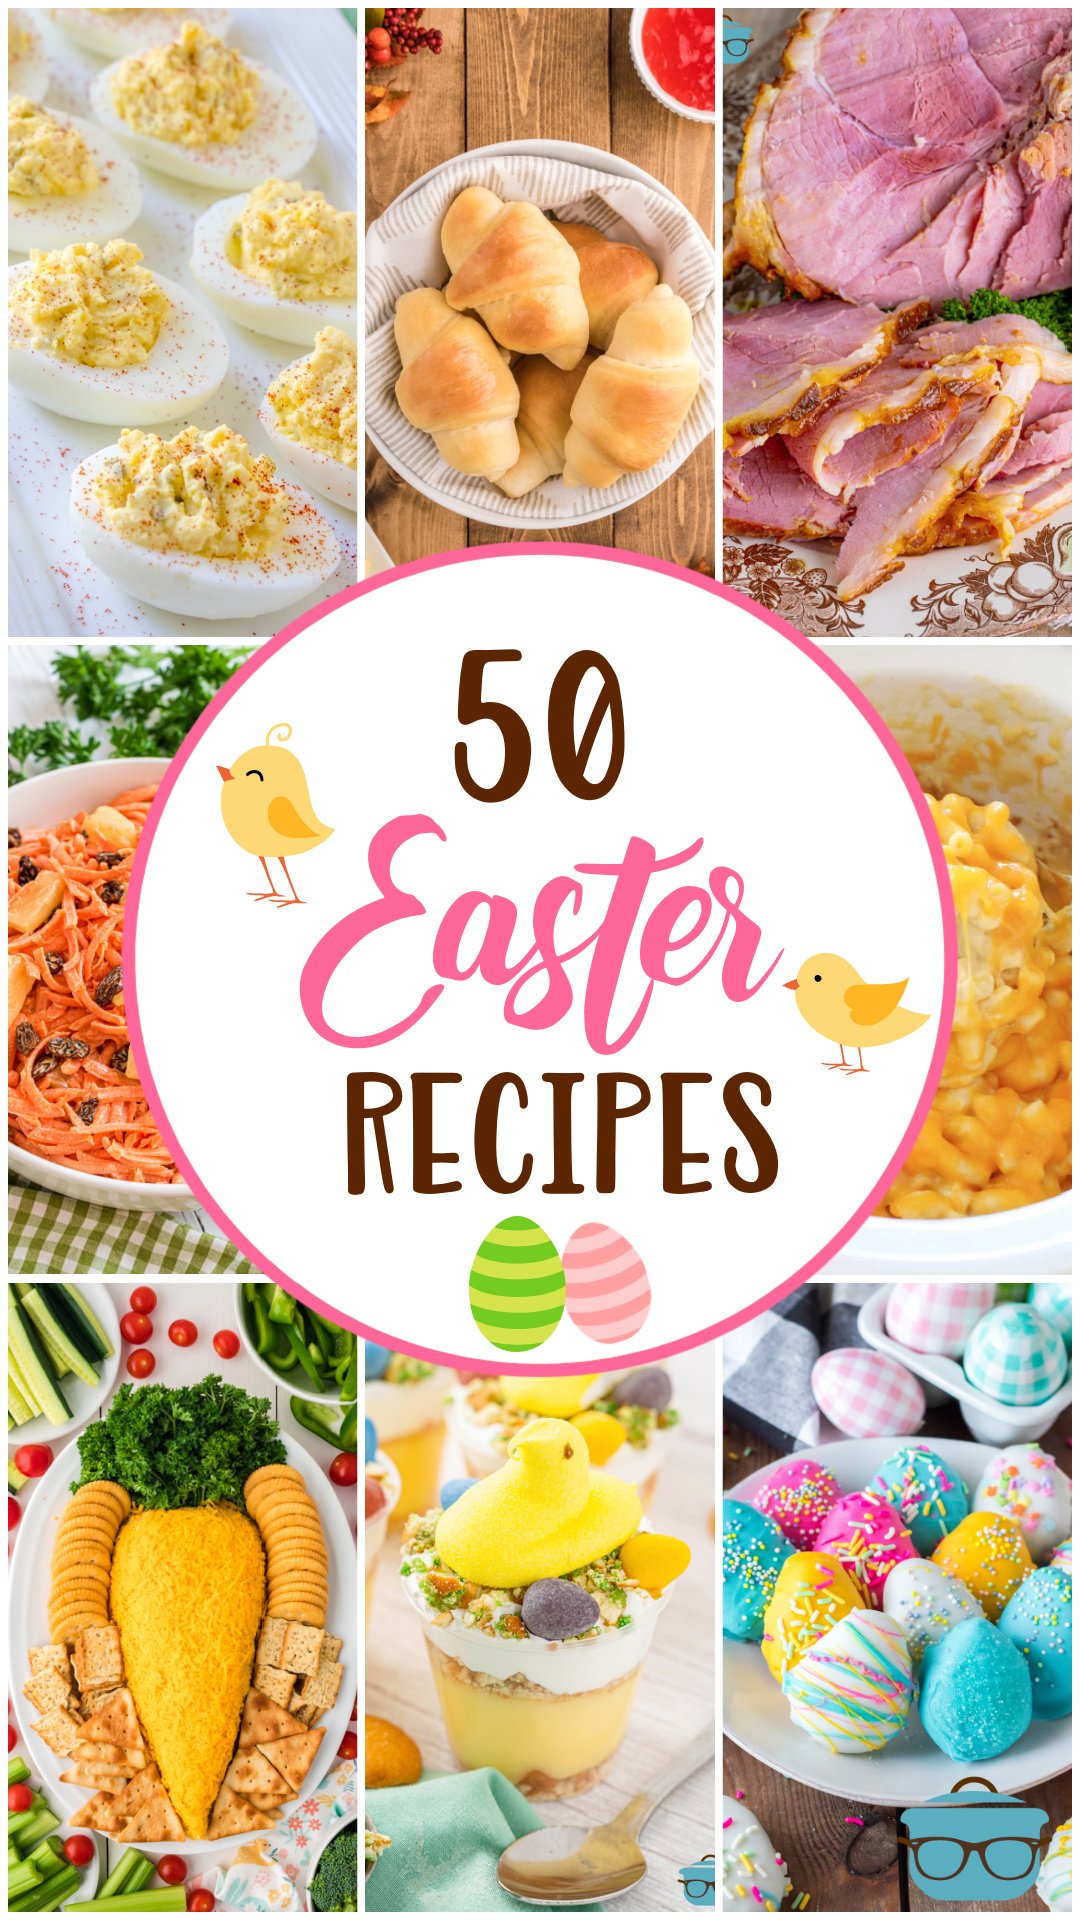 a collage of 9 photos showing Easter foods with text in the center that says "50 Easter Recipes". 